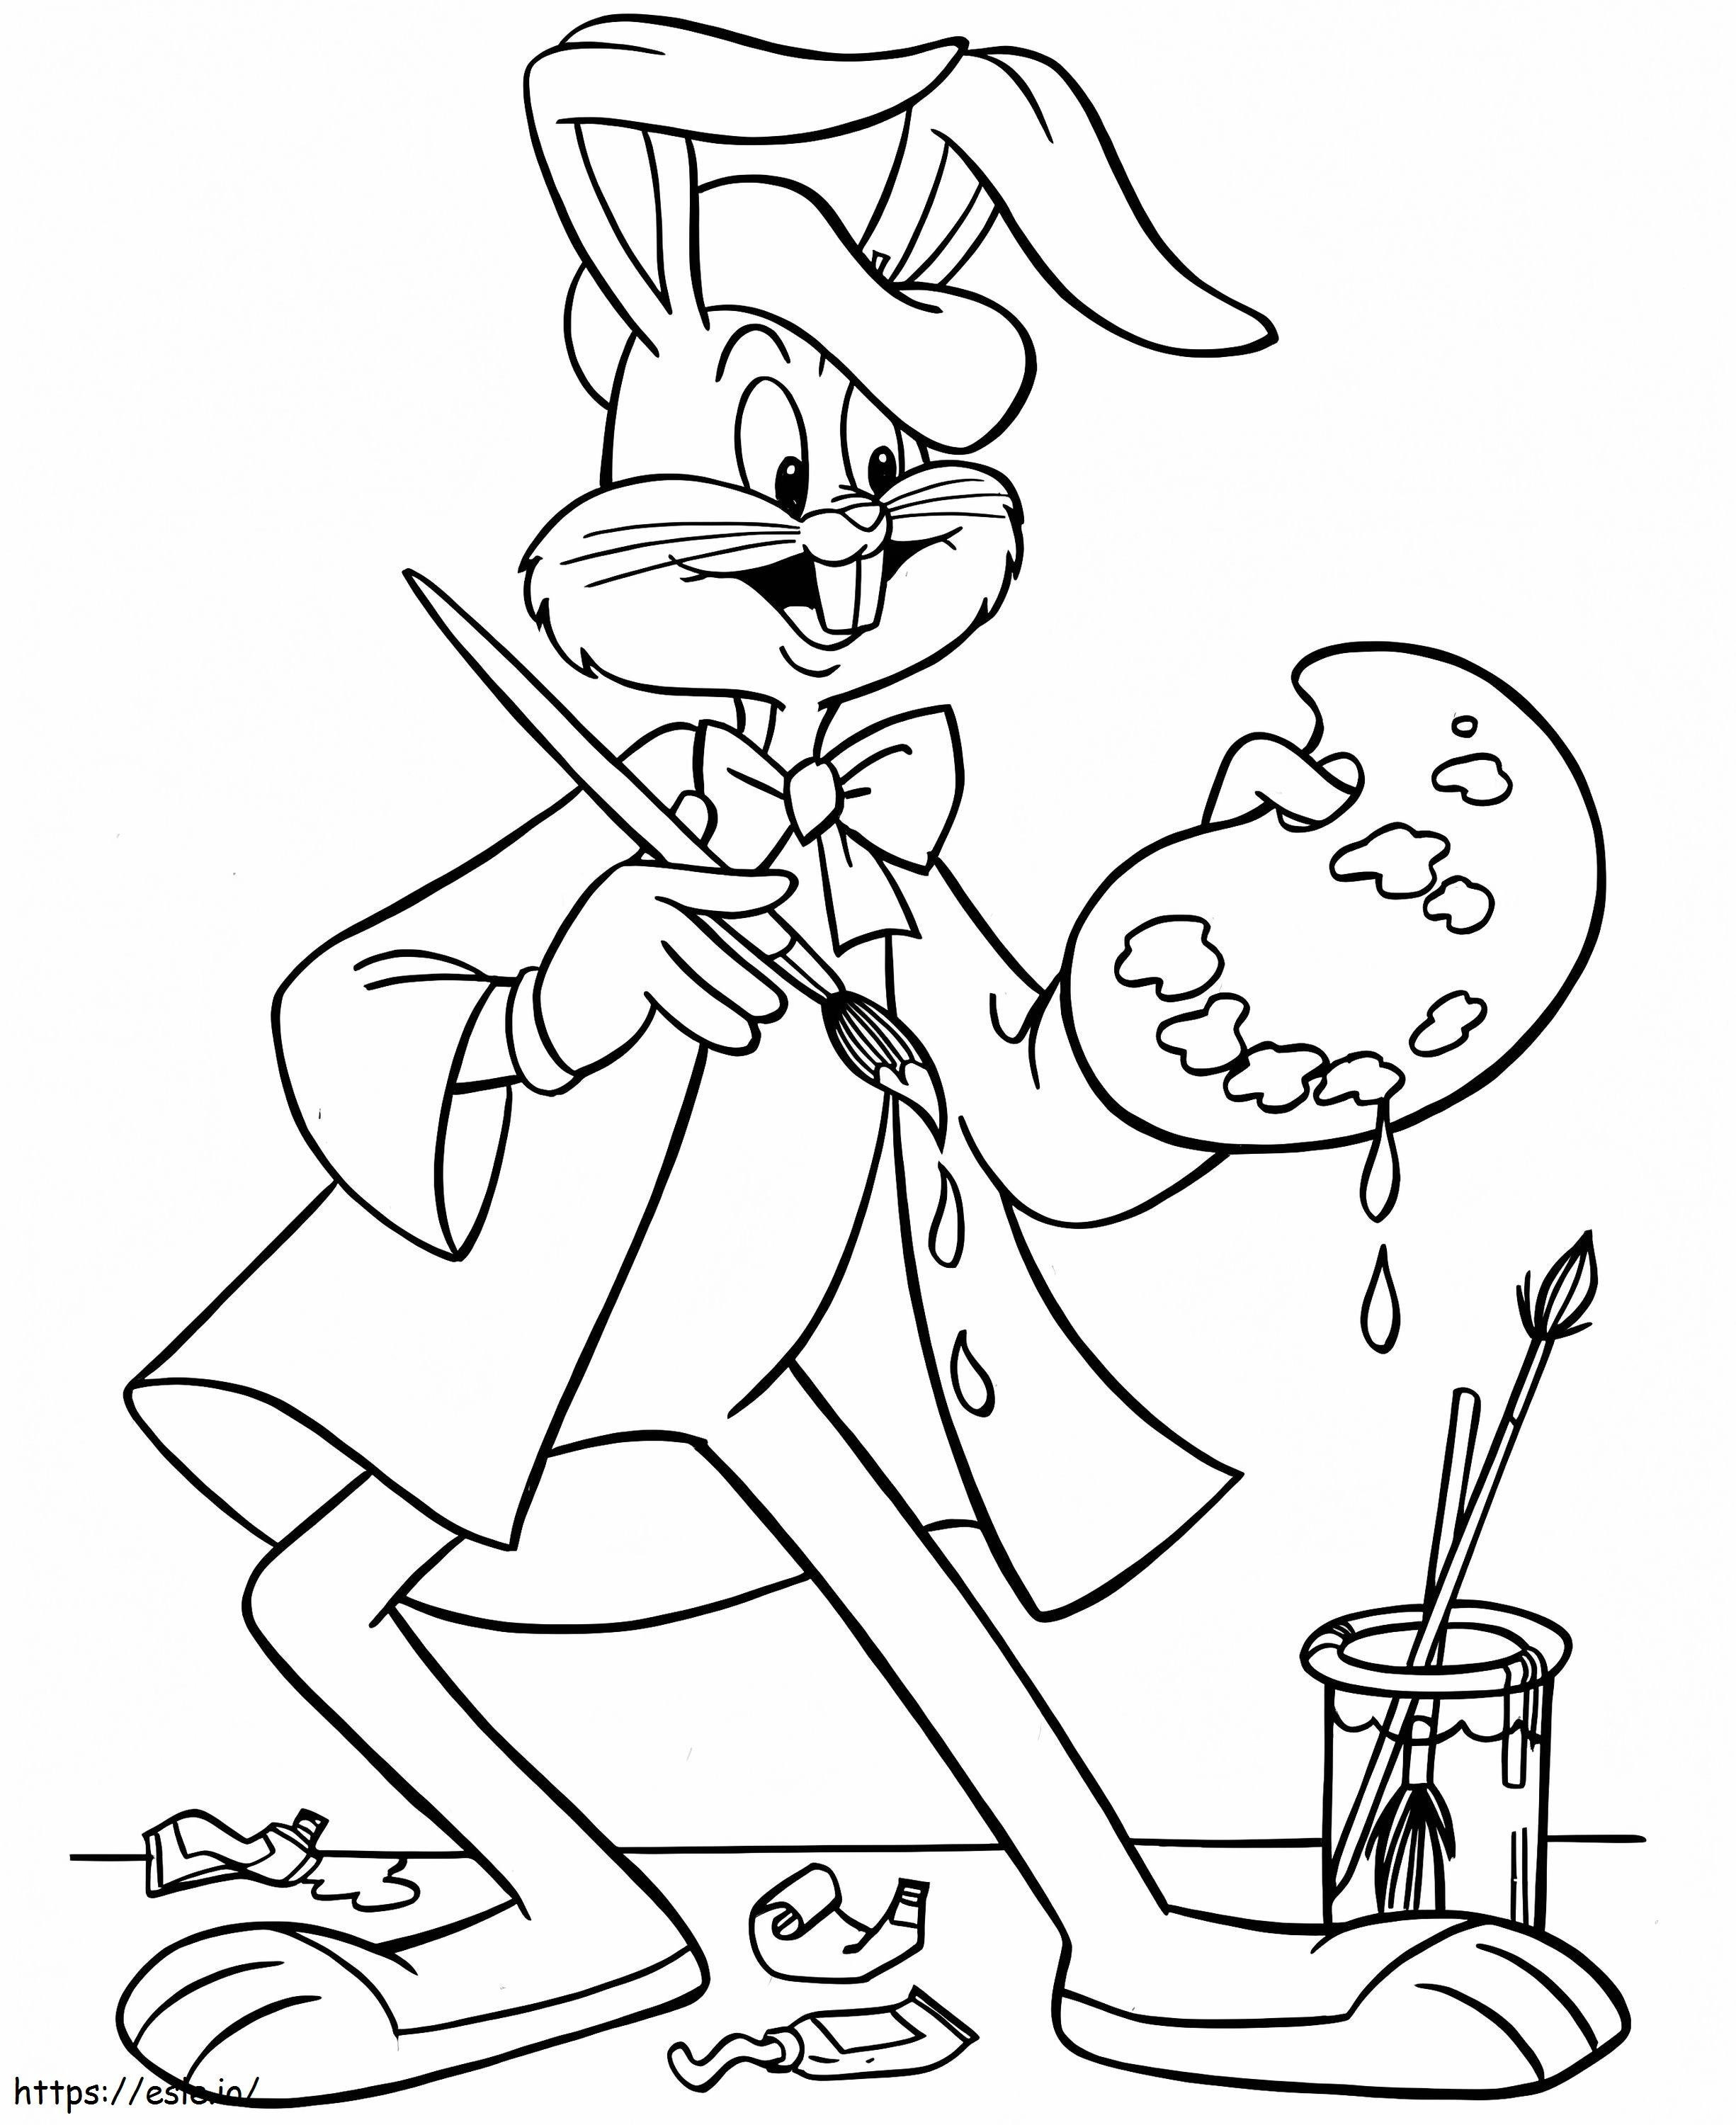 Bugs Bunny Coloring Pages coloring page